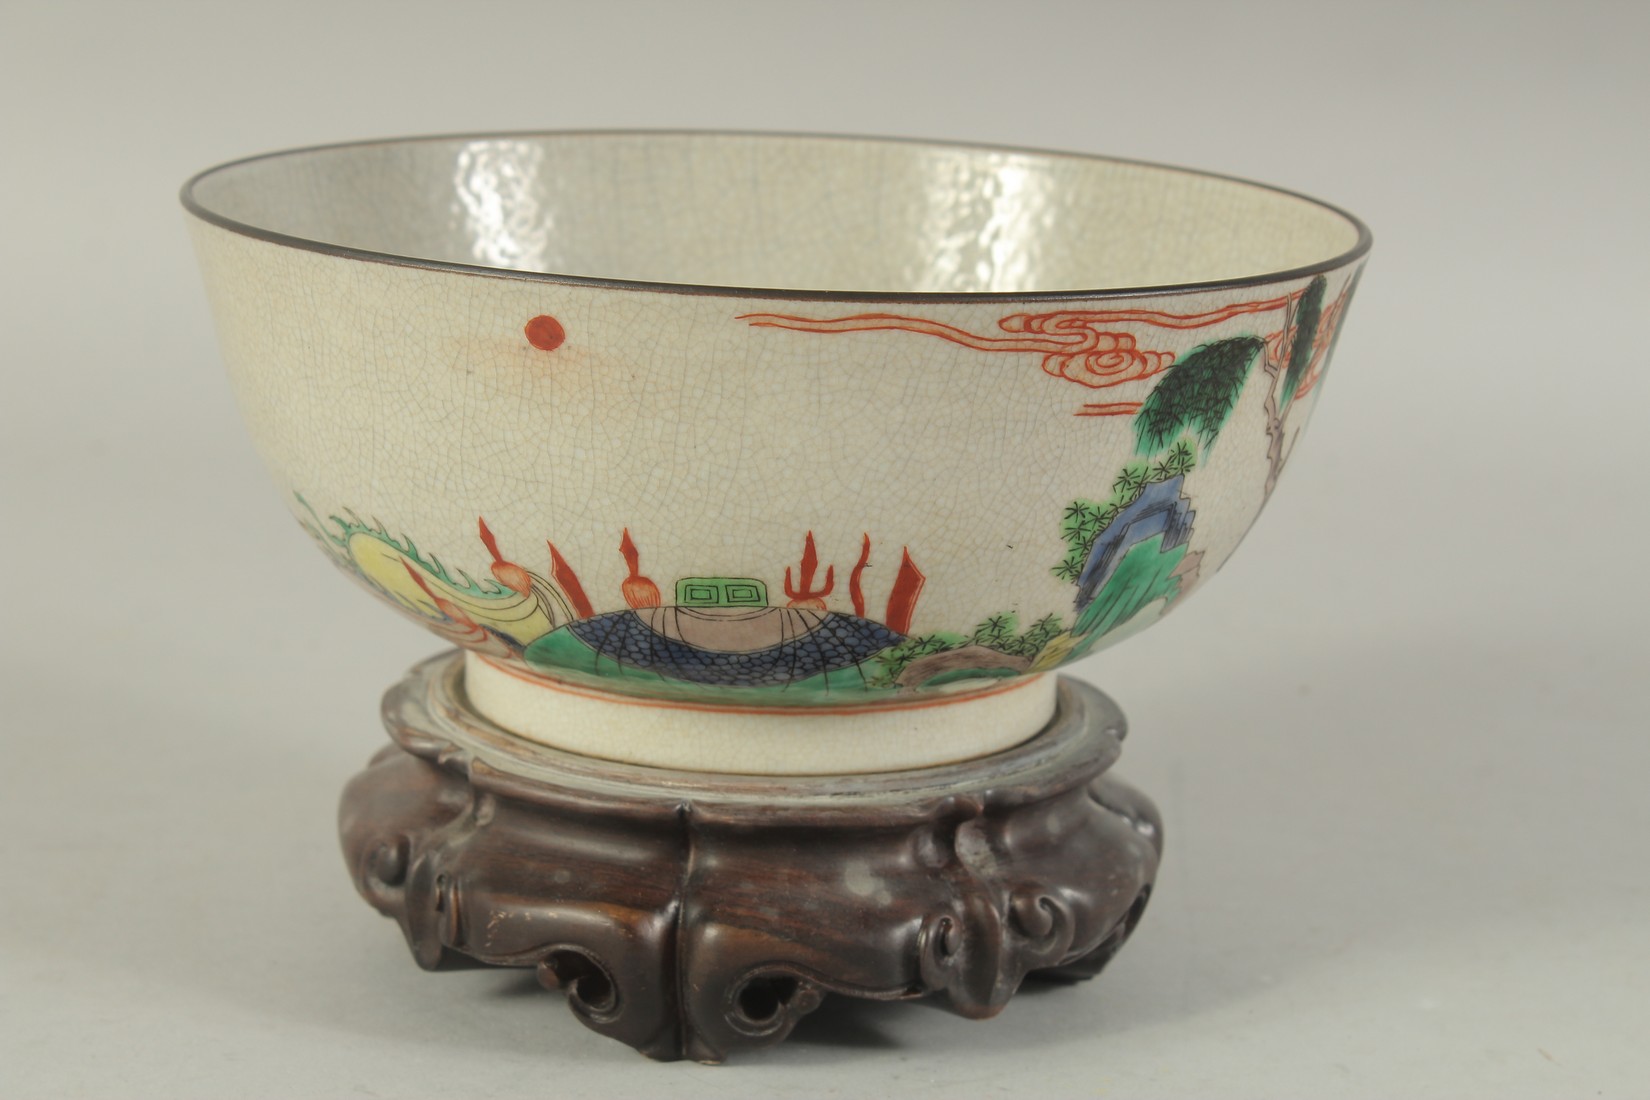 A CHINESE FAMILLE VERTE PORCELAIN BOWL - possibly Qing dynasty, with hardwood stand, the exterior - Image 2 of 7